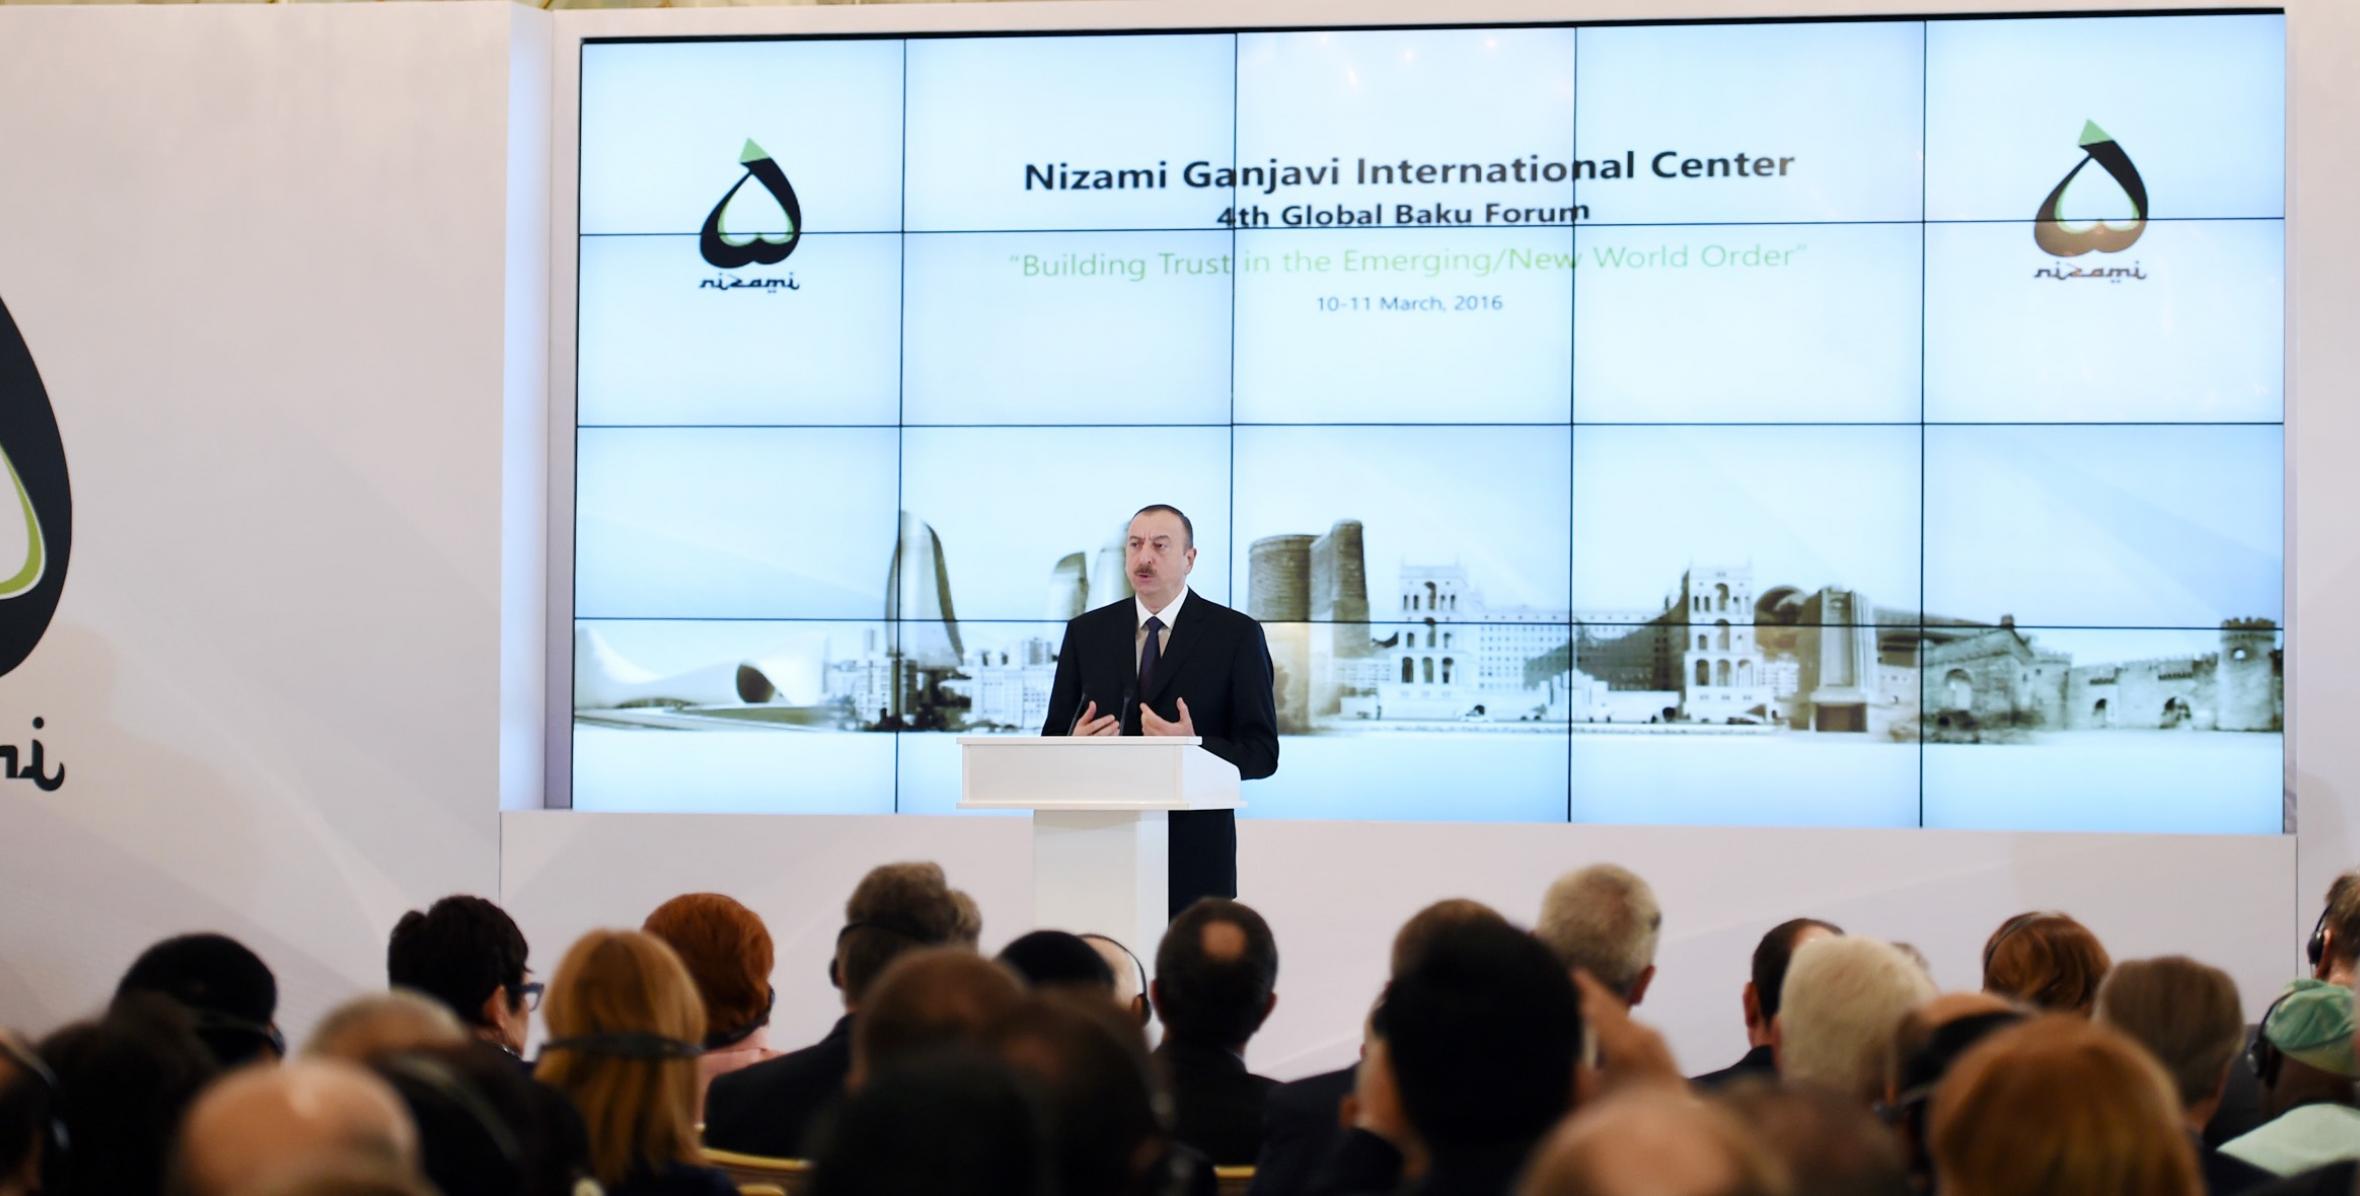 Speech by Ilham Aliyev at the the opening of the 4th Global Baku Forum